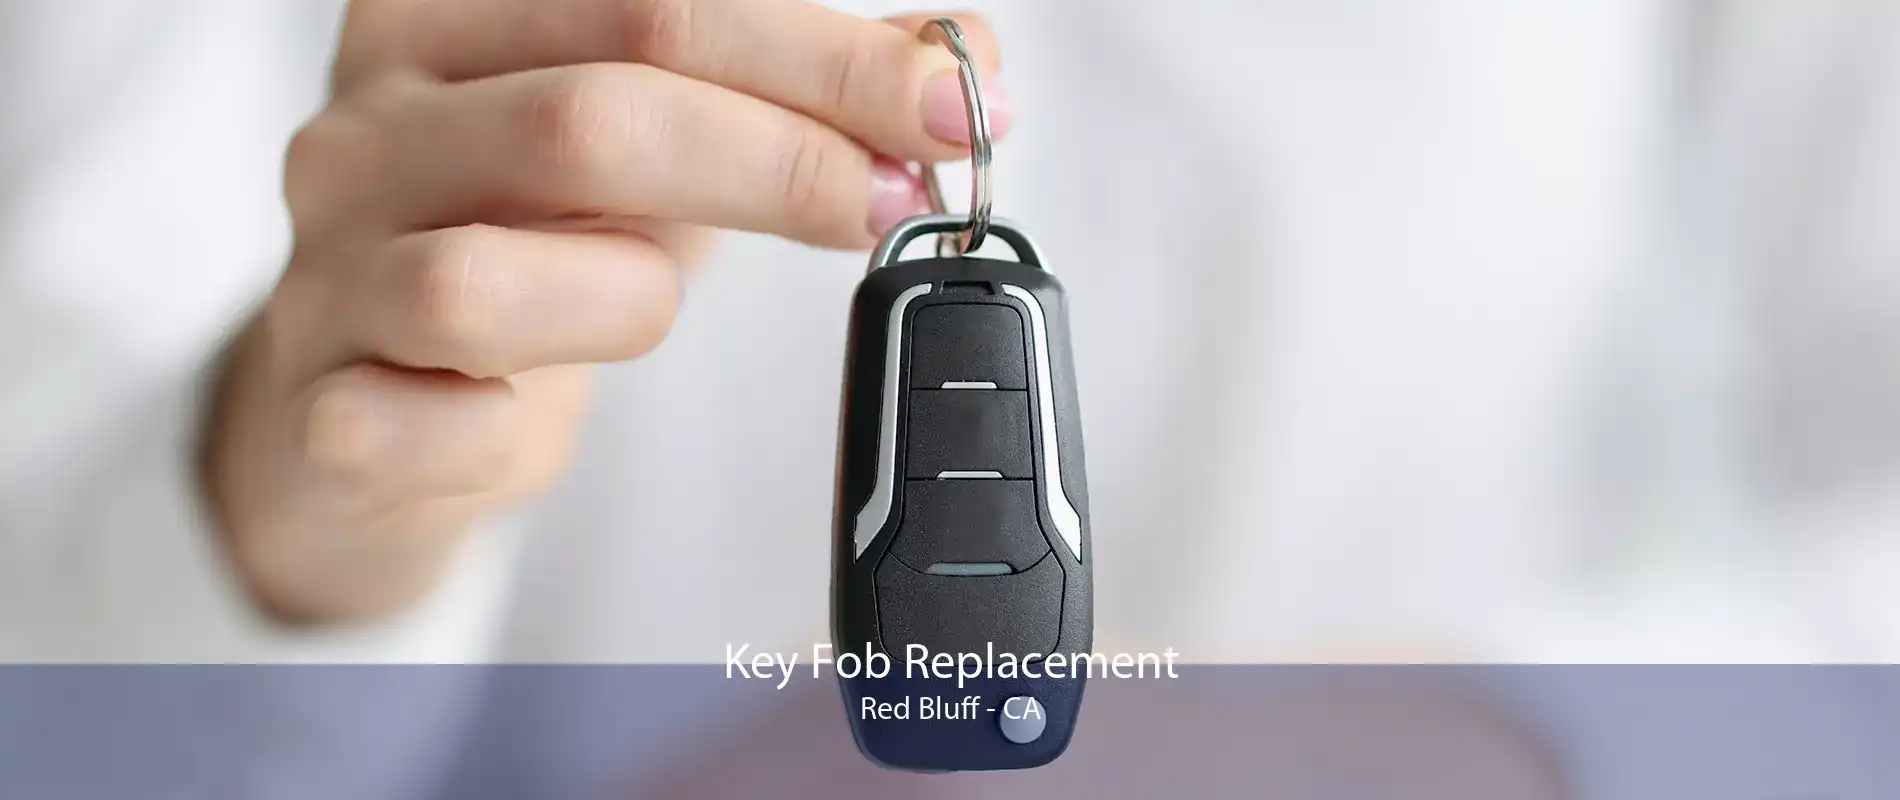 Key Fob Replacement Red Bluff - CA